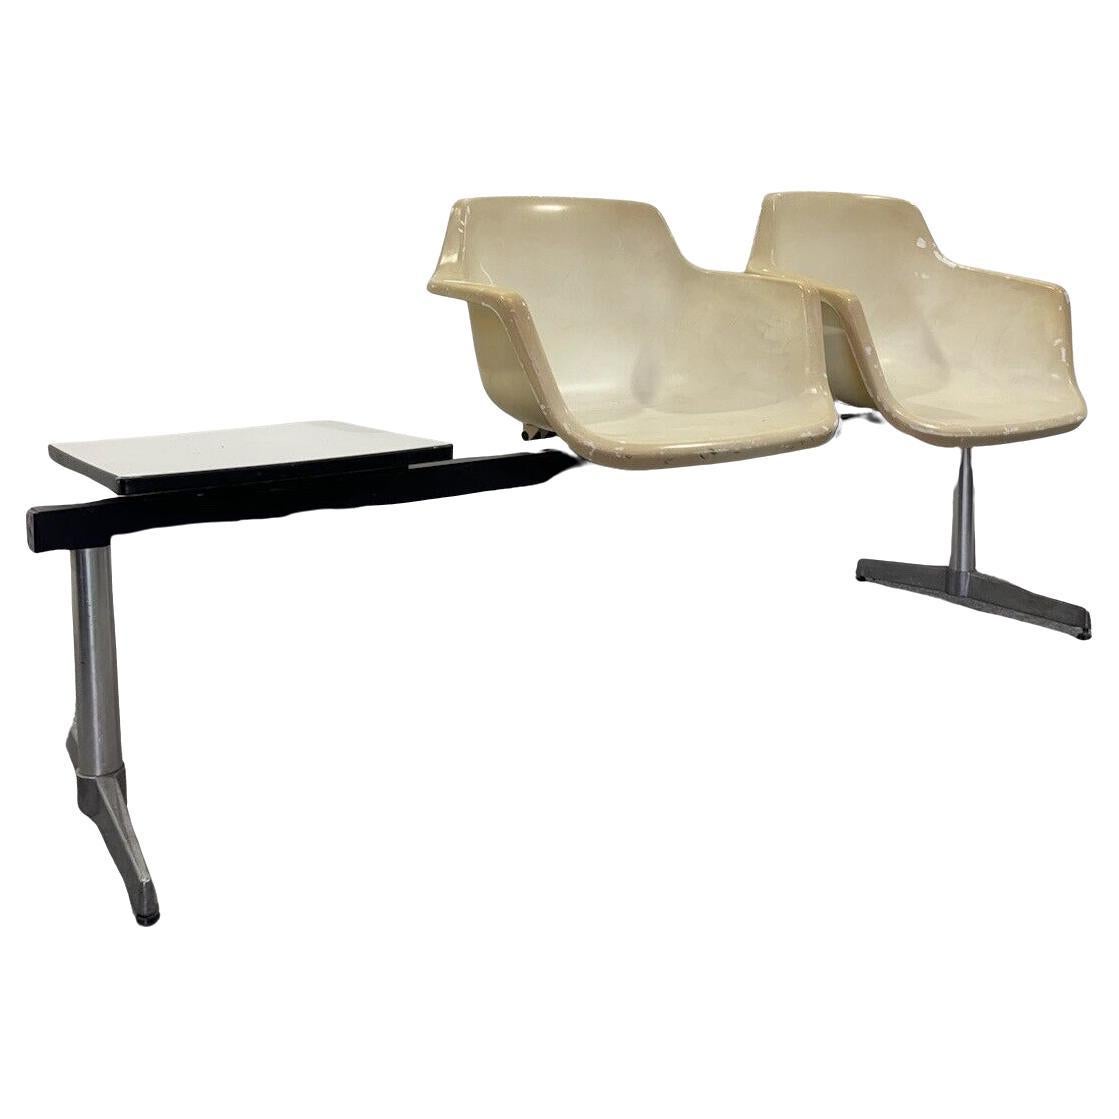 Airport Bench by Charles & Ray Eames Tandem Seating for Herman Miller